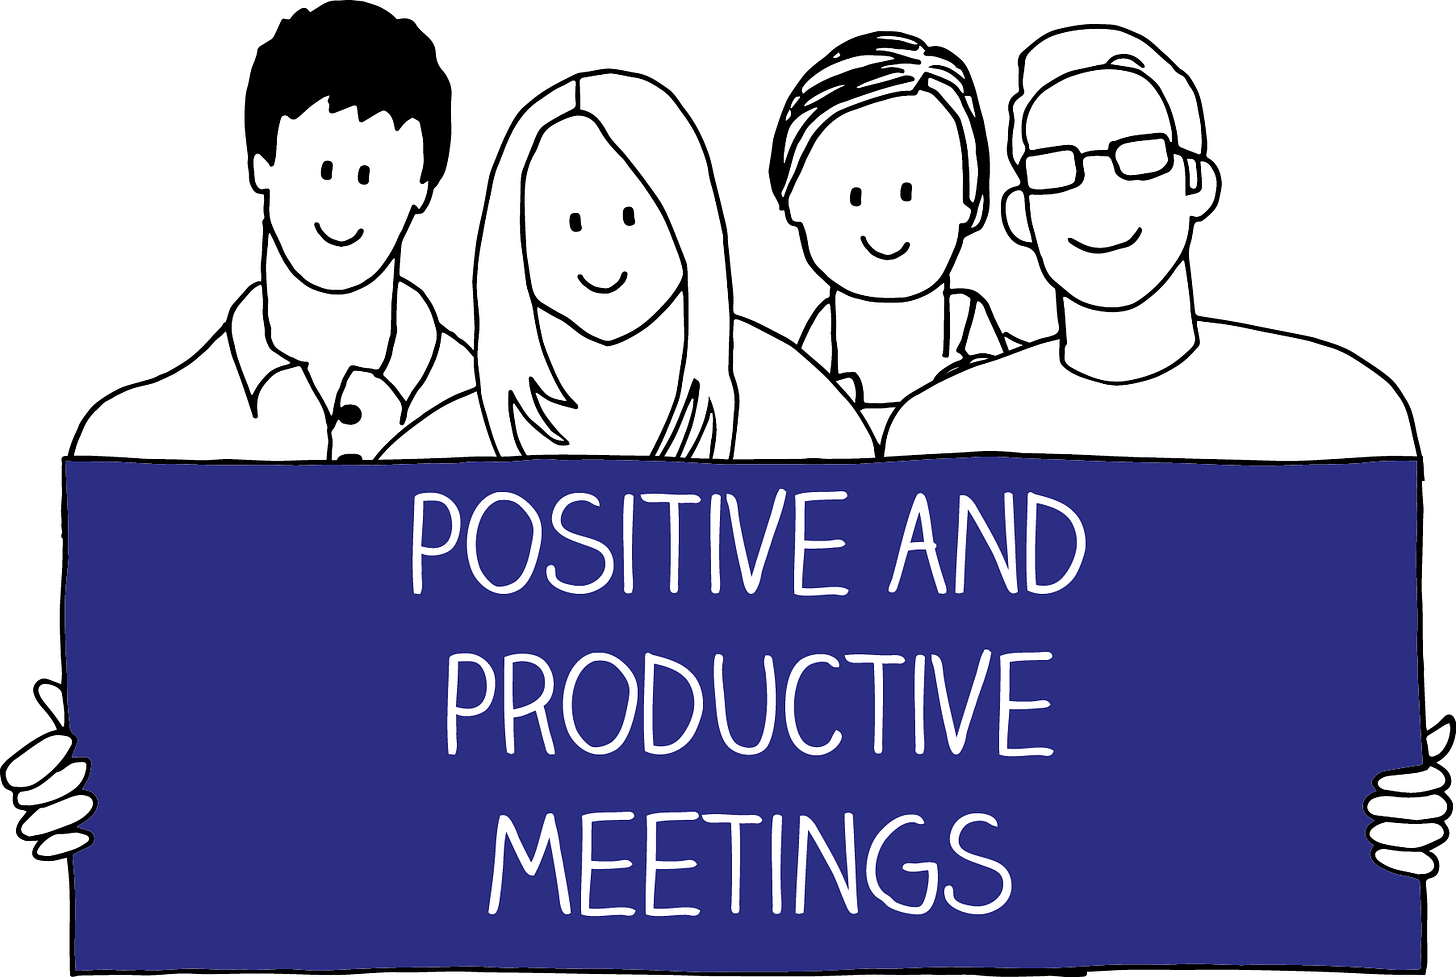 Positive and productive meetings - HSA Online Learning